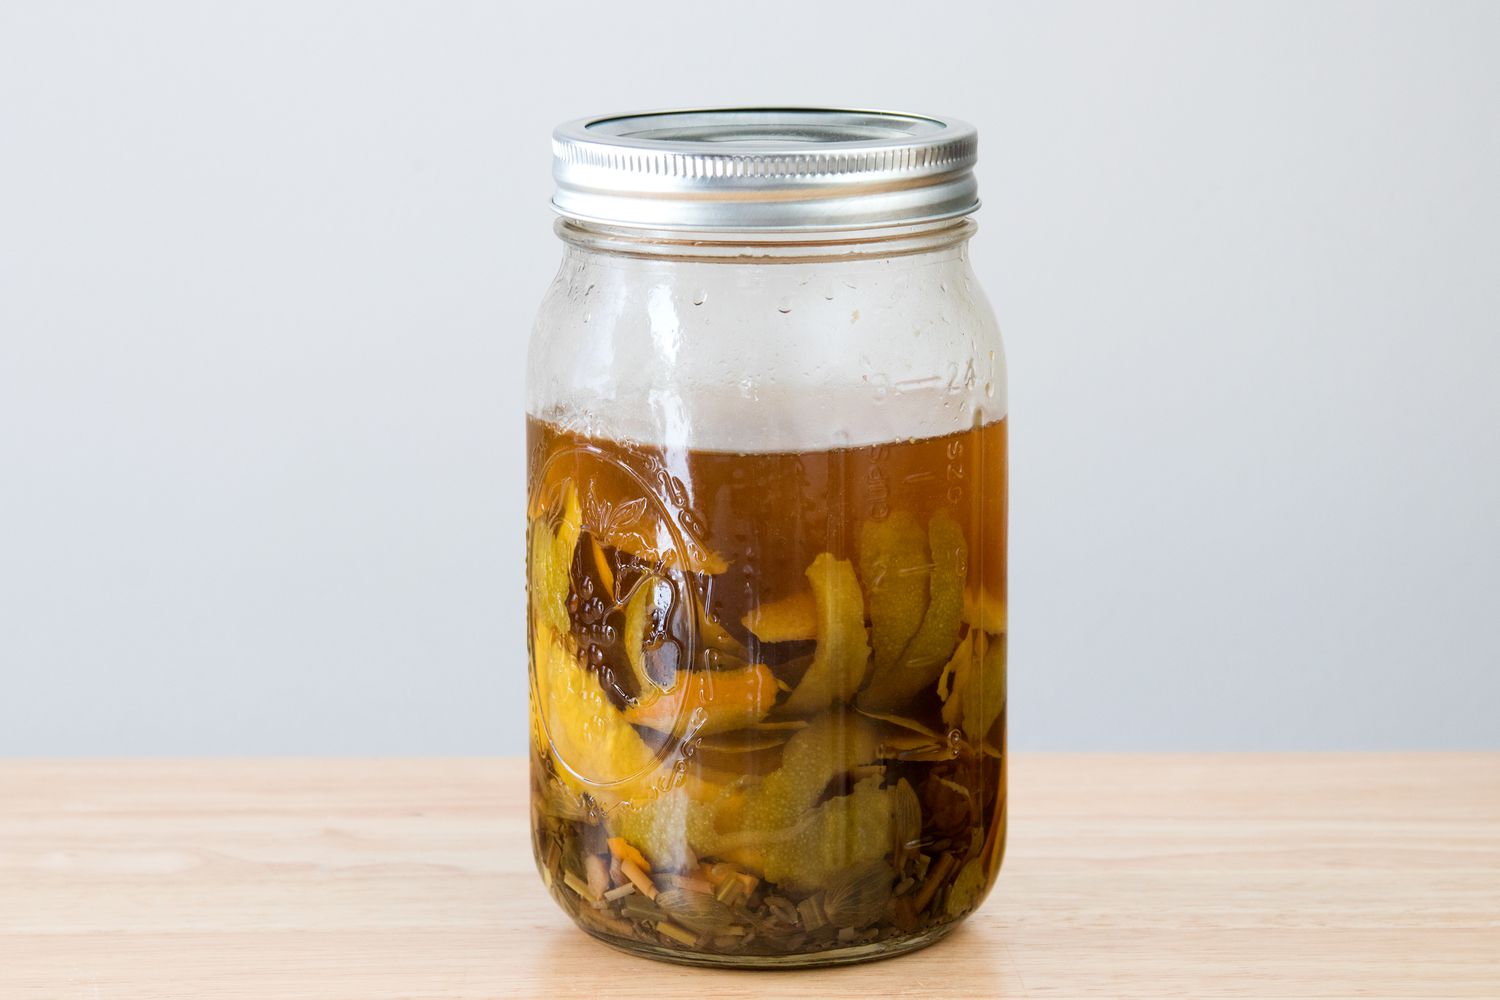 Infusing Homemade Quinine-Free Tonic Syrup